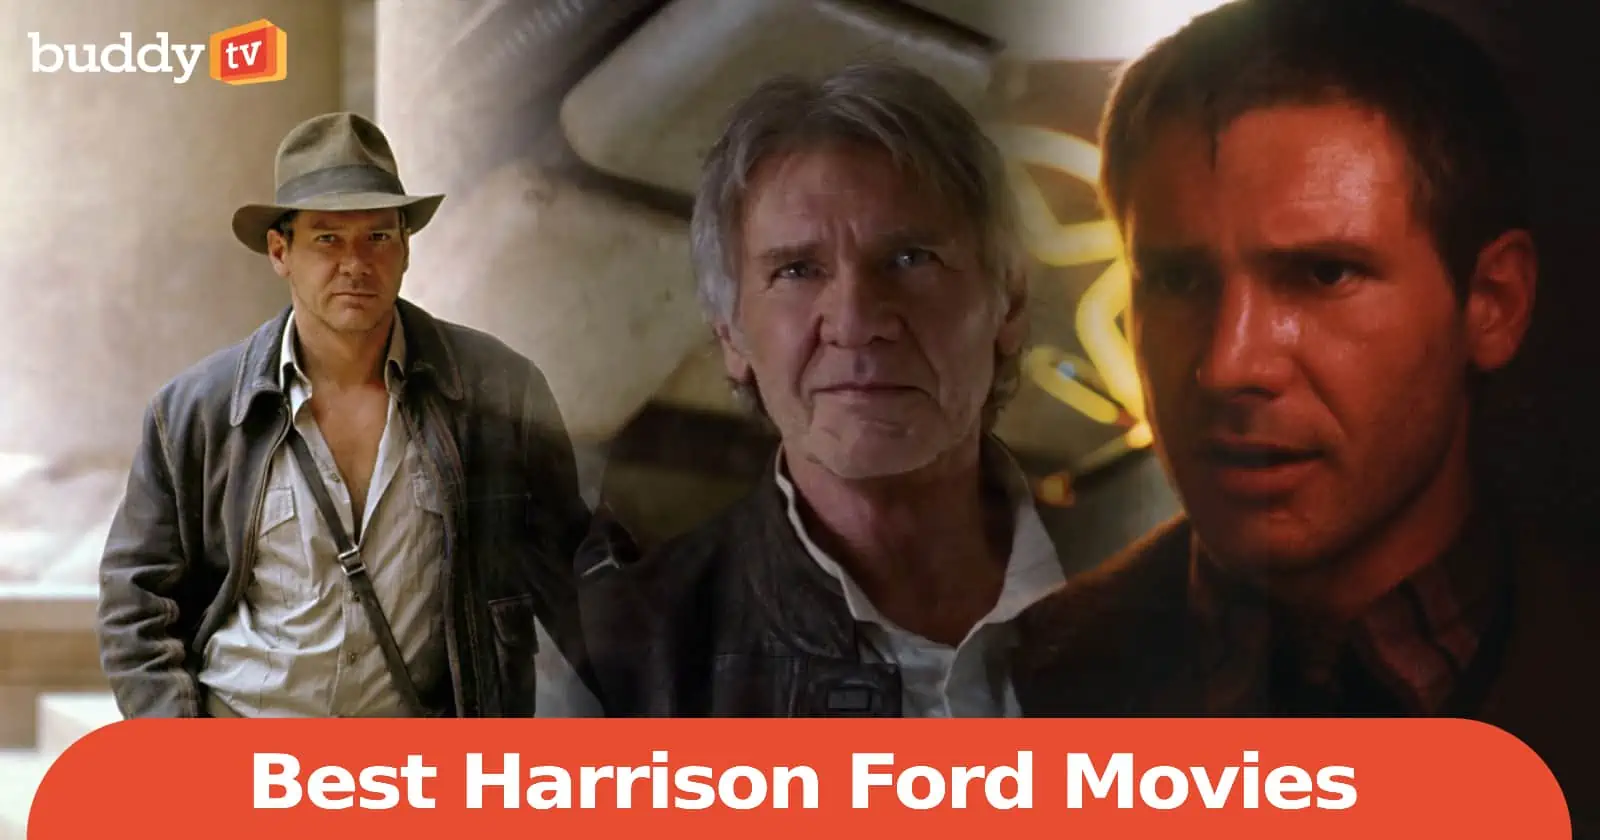 10 Best Harrison Ford Movies, Ranked by Viewers